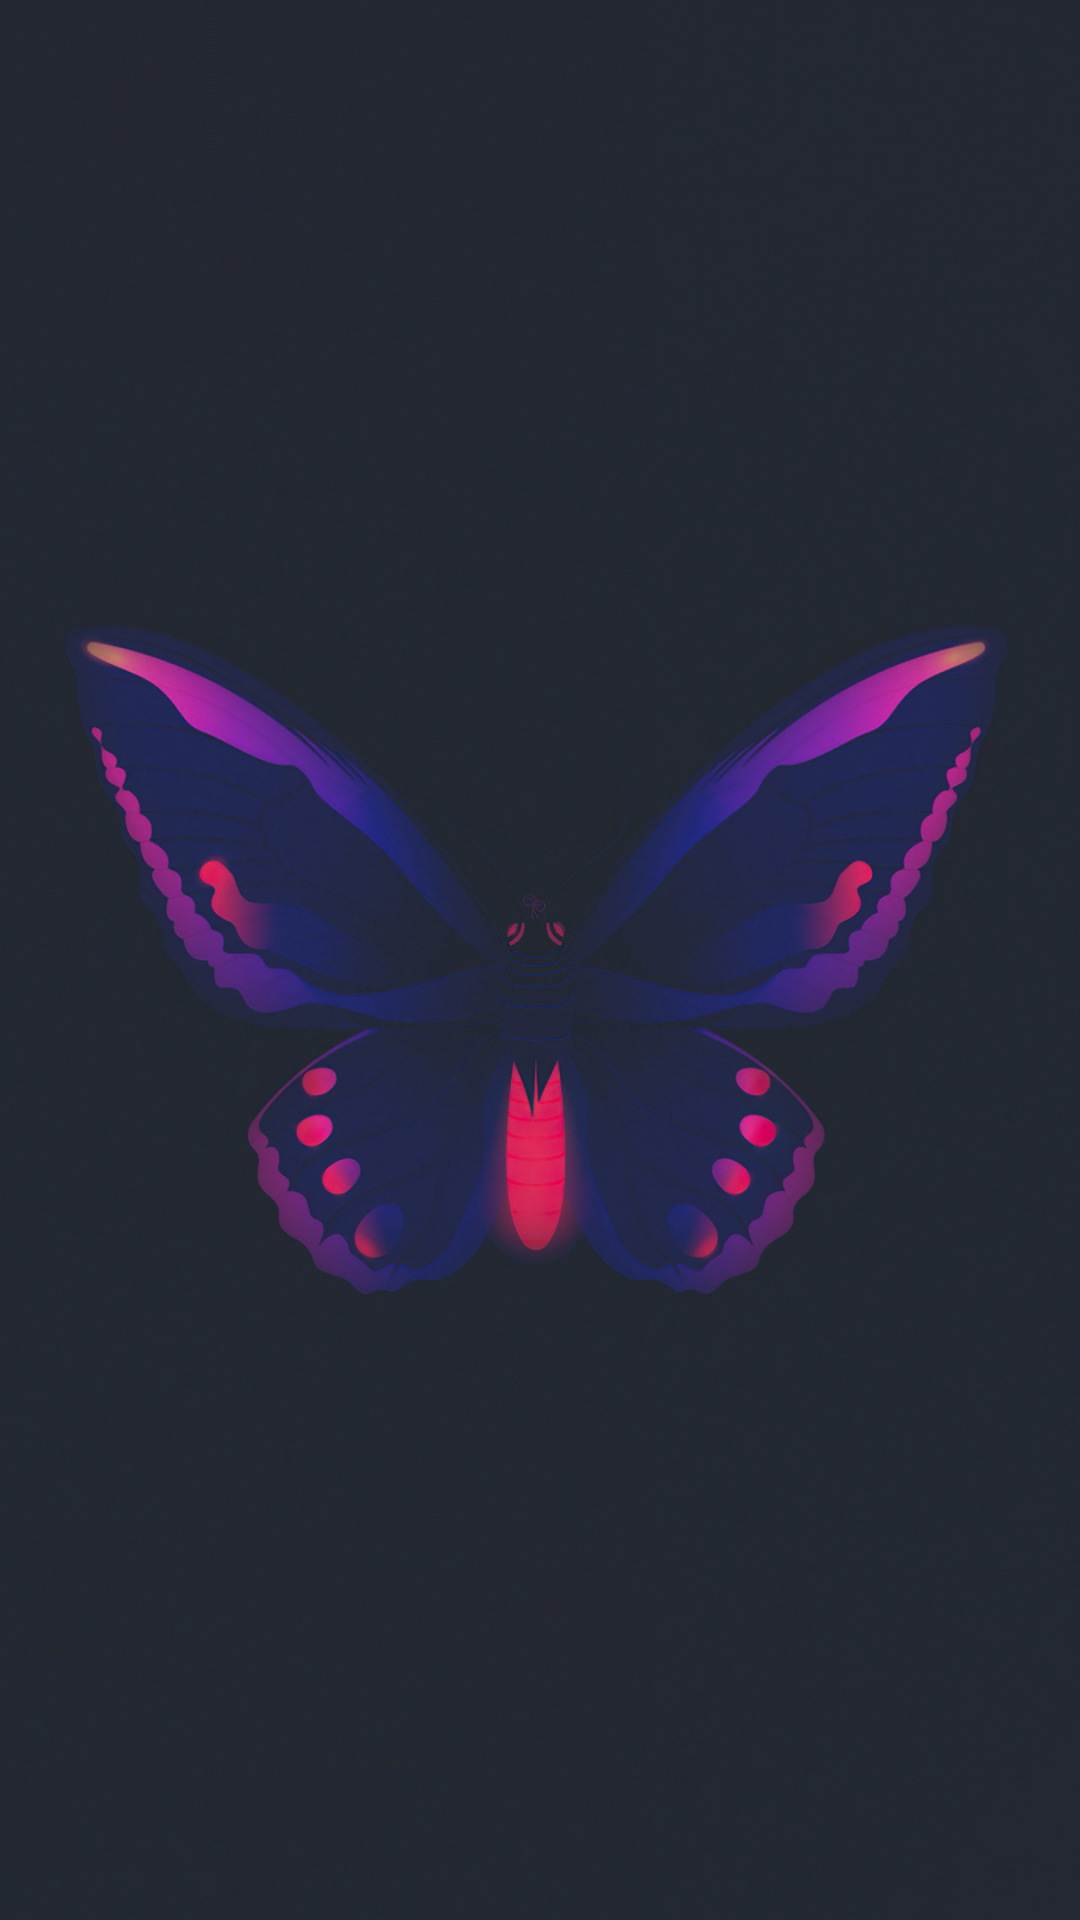 Butterfly Blue Glowing Illustration Background Butterfly Glow Colorful Butterfly  Background Image And Wallpaper for Free Download